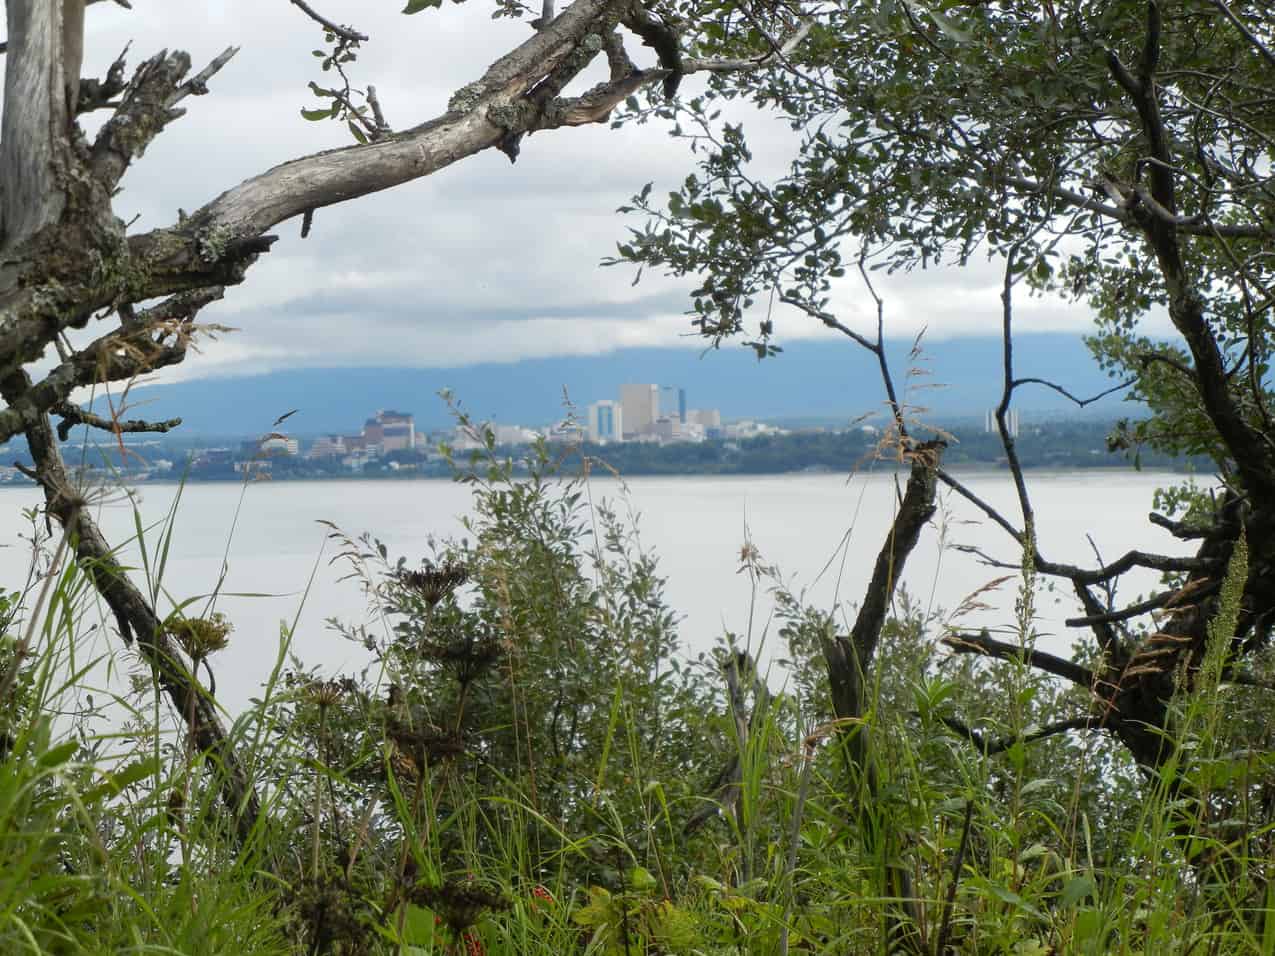 View of Anchorage, Alaska through the trees and over the water